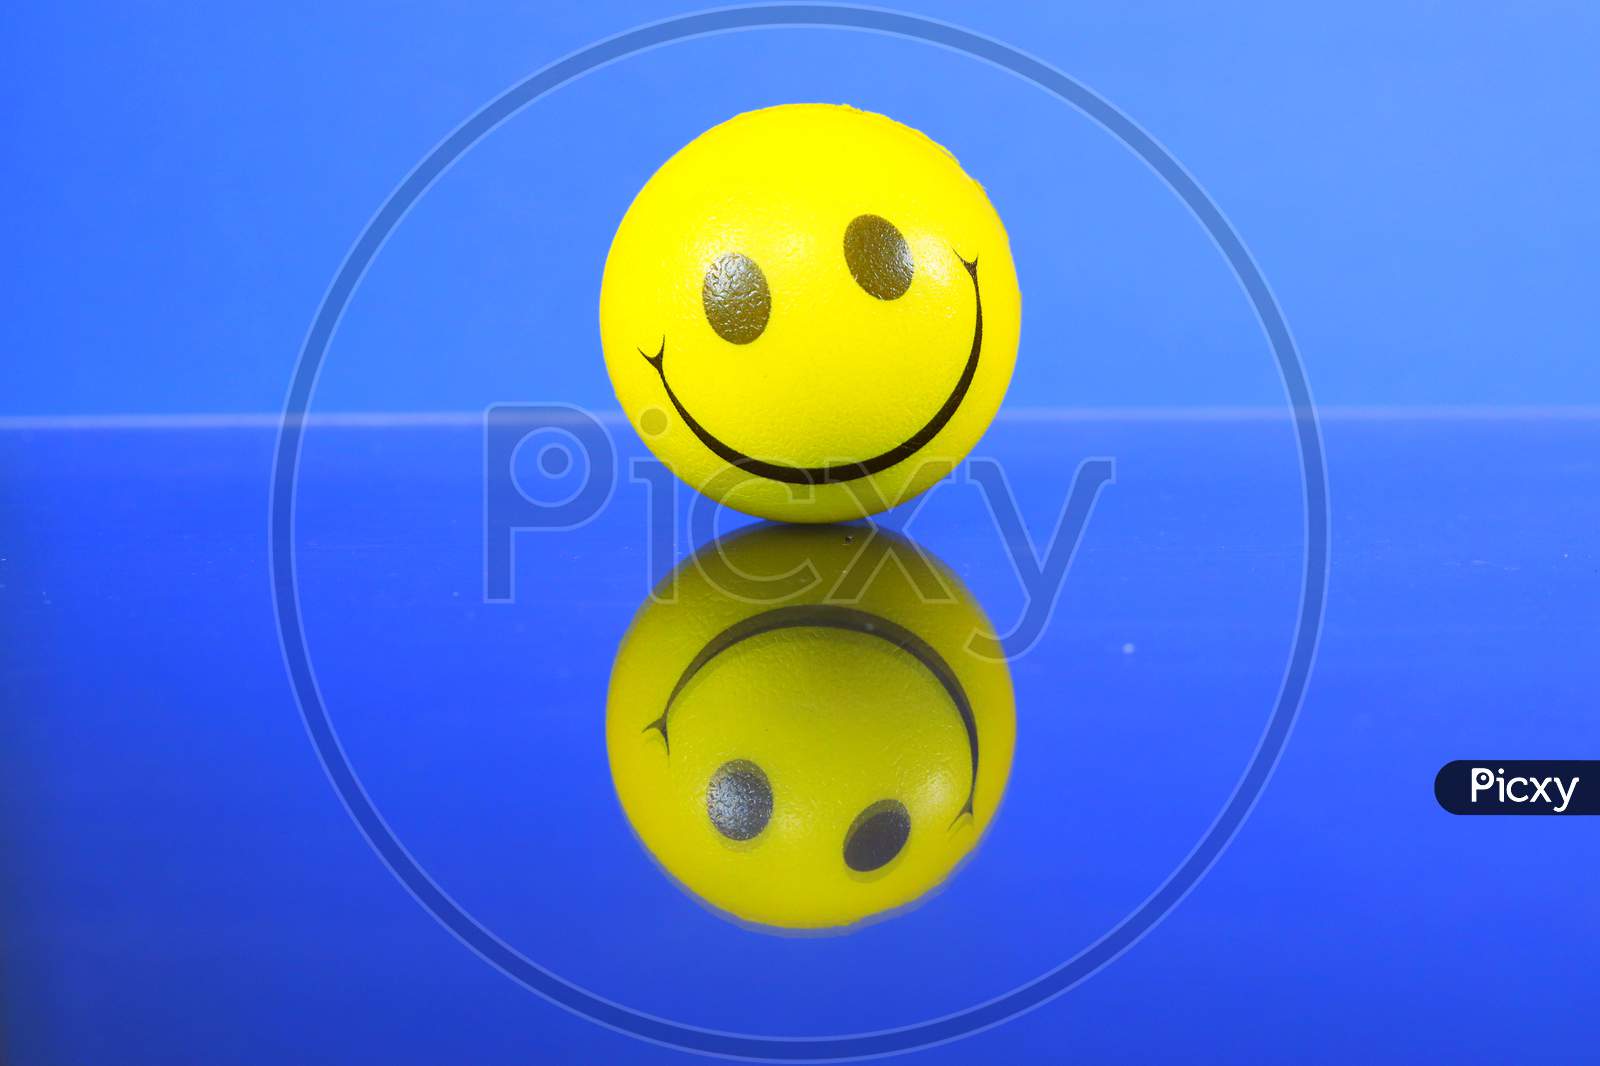 Yellow ball smiling face